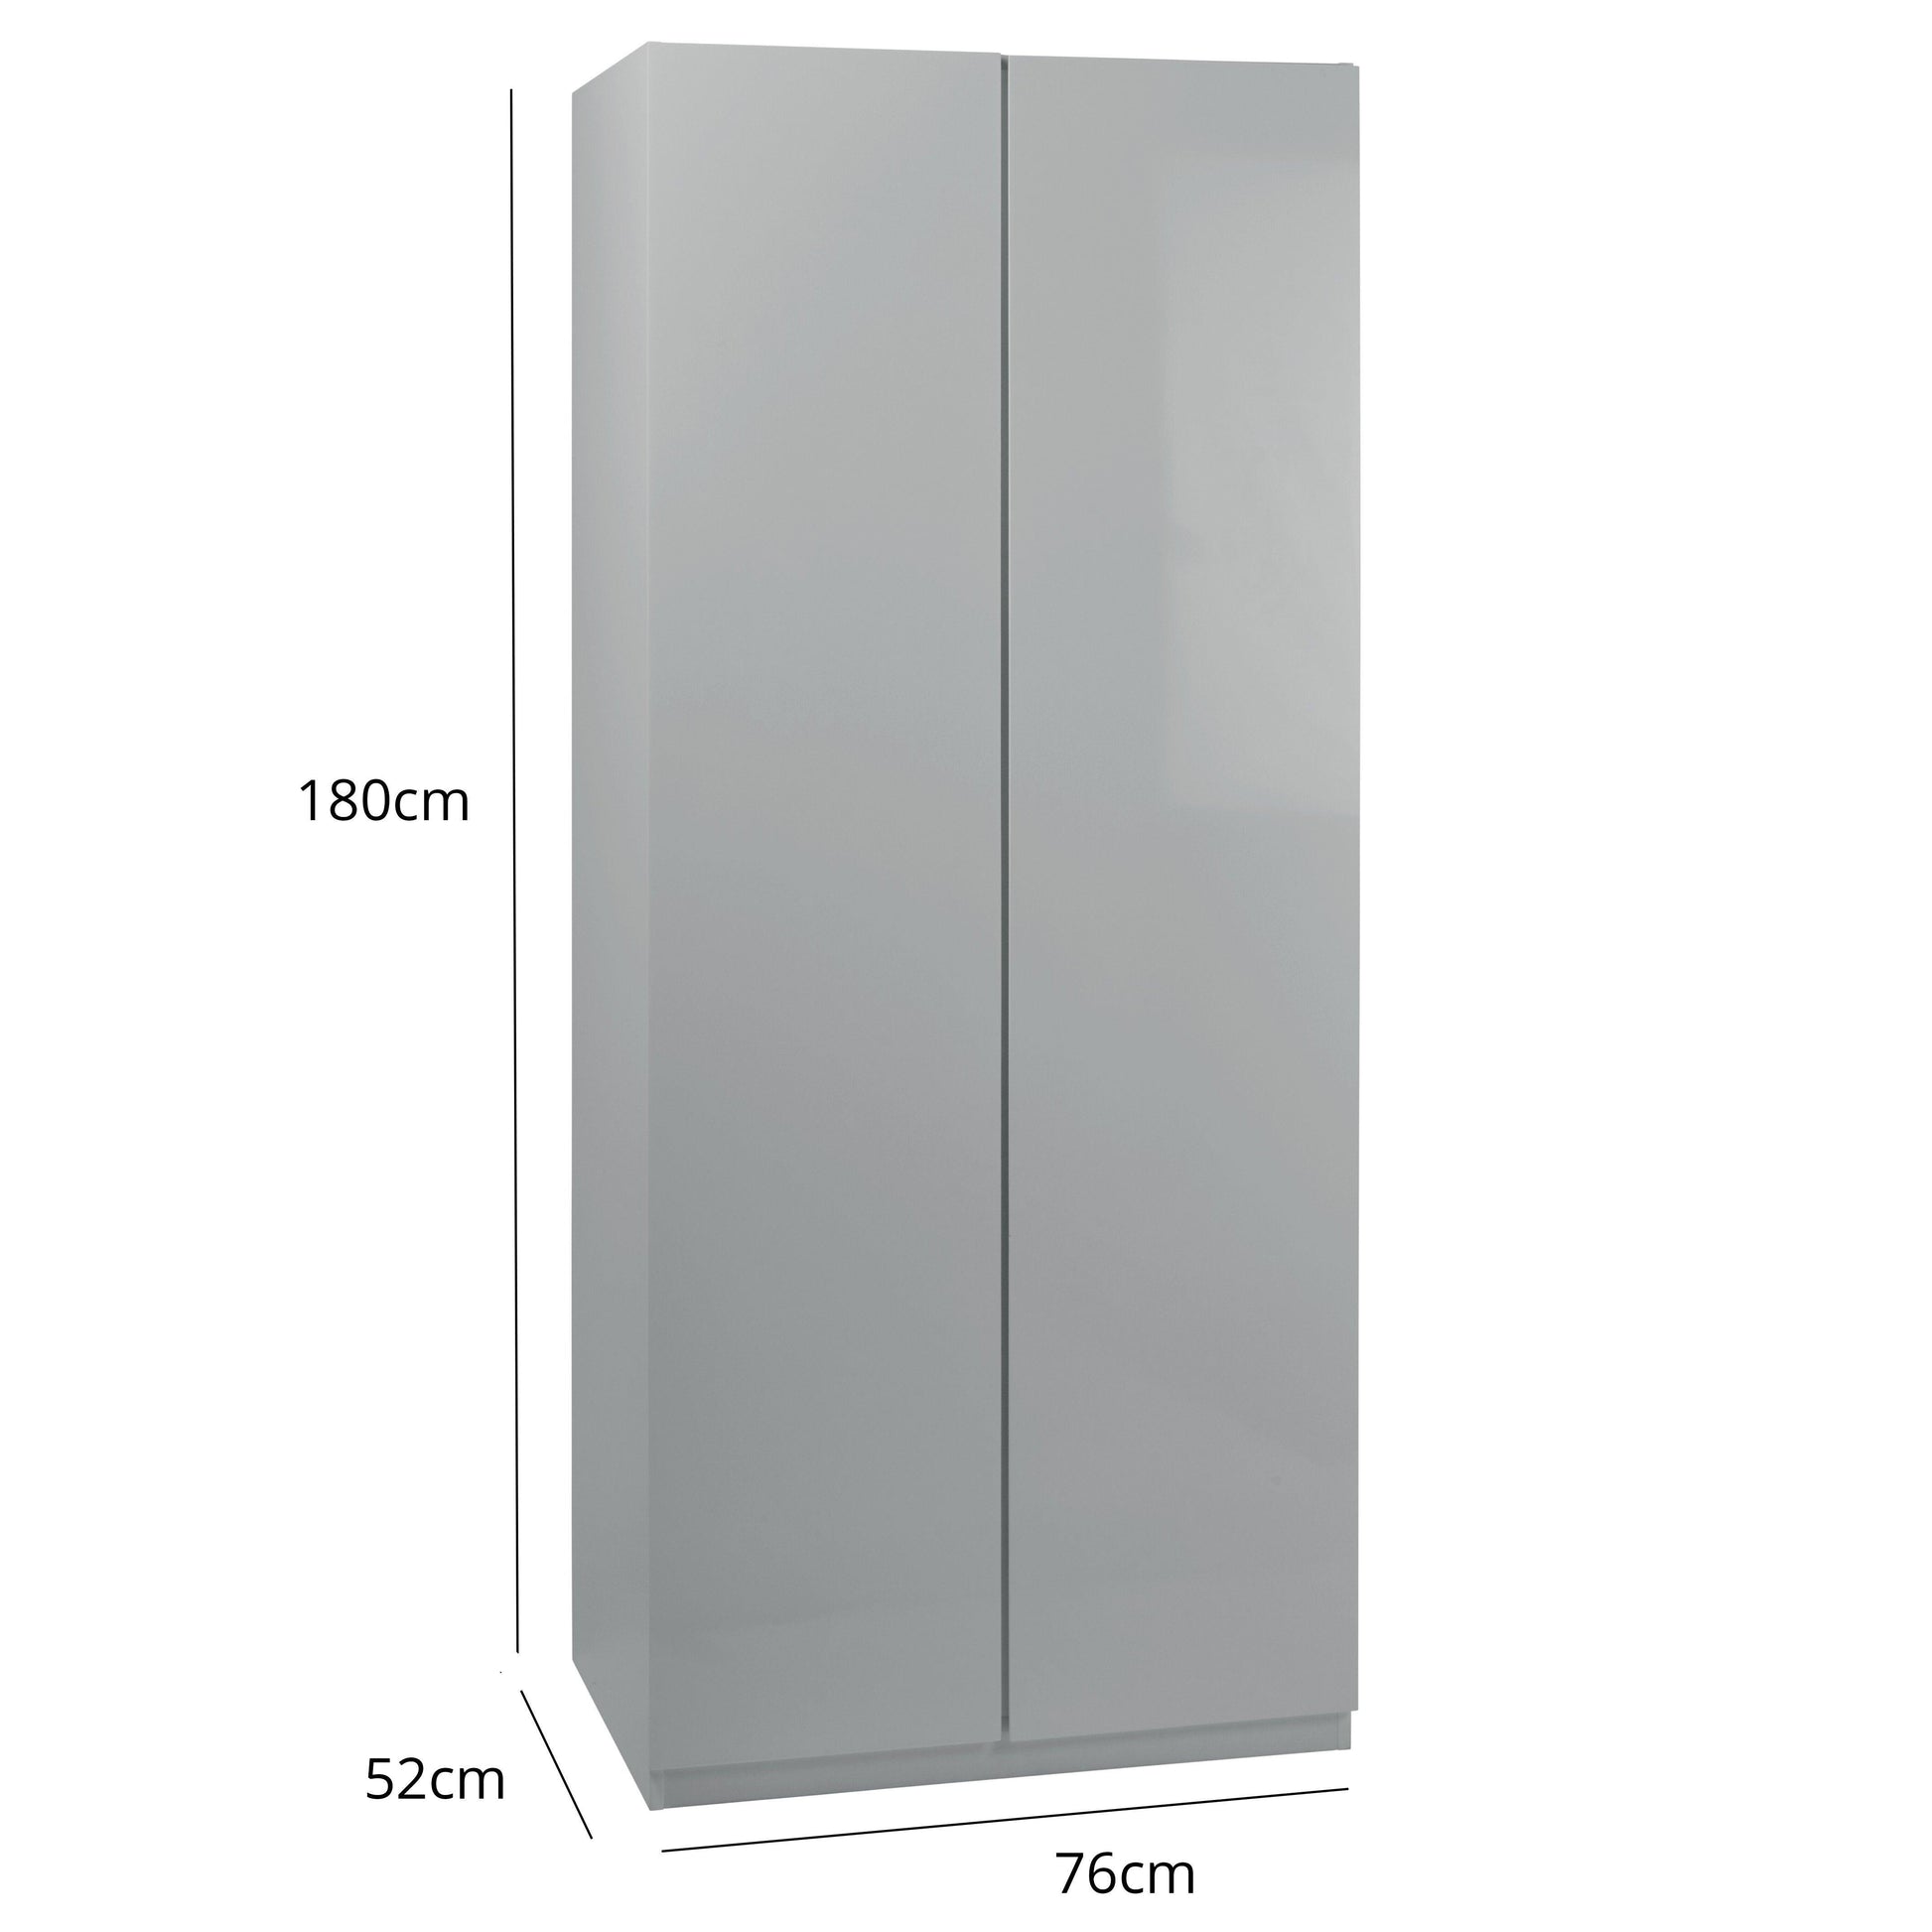 Clemmie high gloss double wardrobe - grey - Laura James